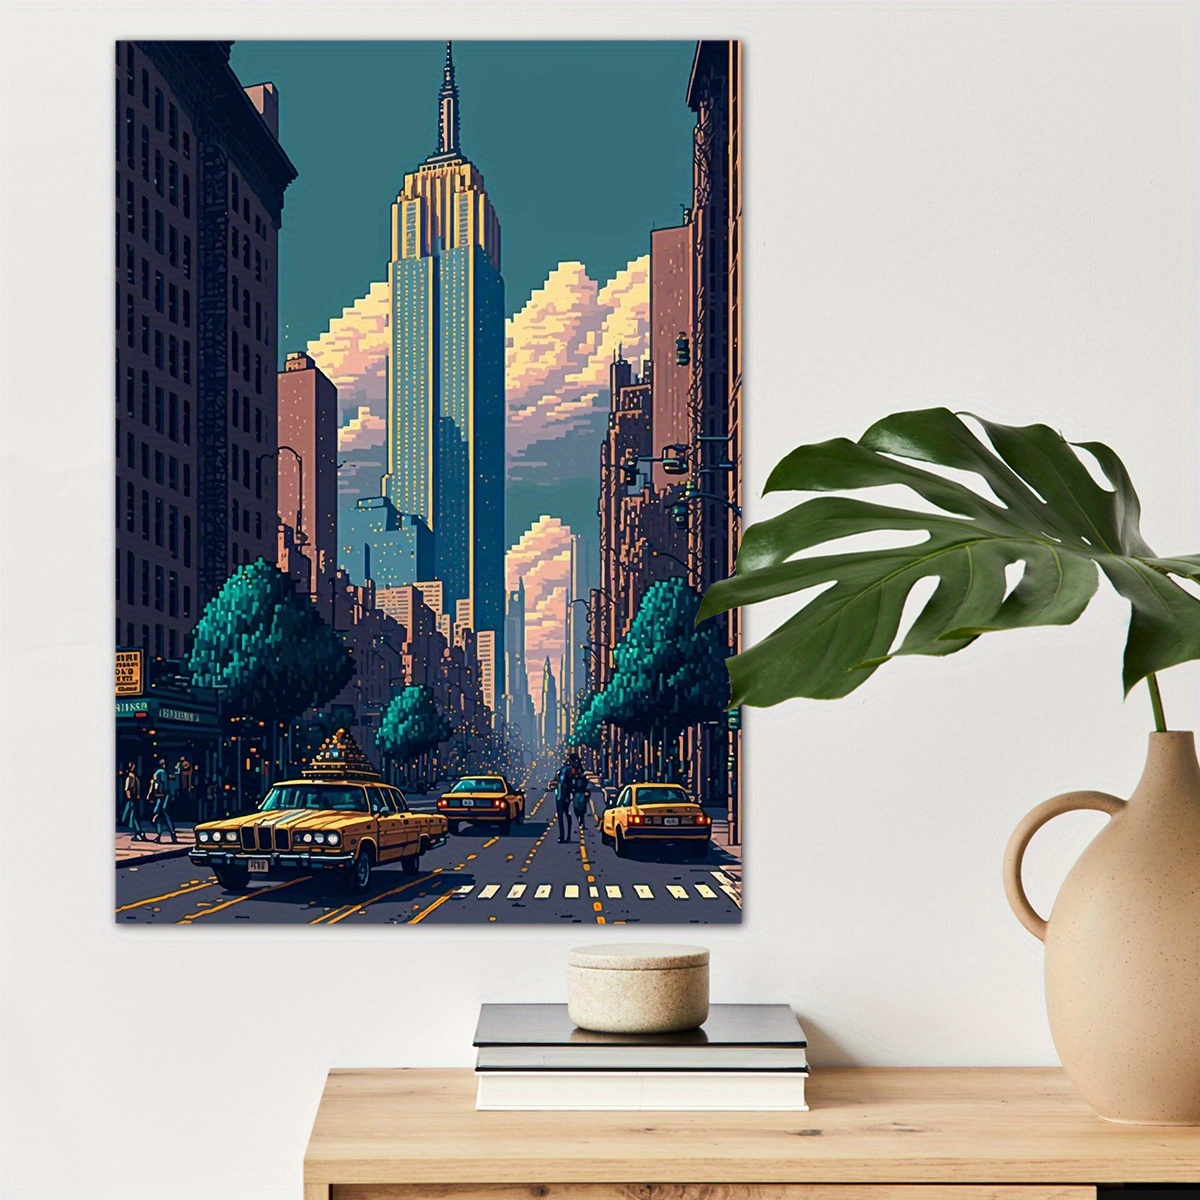 

1pc New York Pixel Art Poster Canvas Wall Art For Home Decor, High Quality Poster Wall Decor Travel Lovers Canvas Prints For Living Room Bedroom Kitchen Office Cafe Decor, Perfect Gift And Decoration